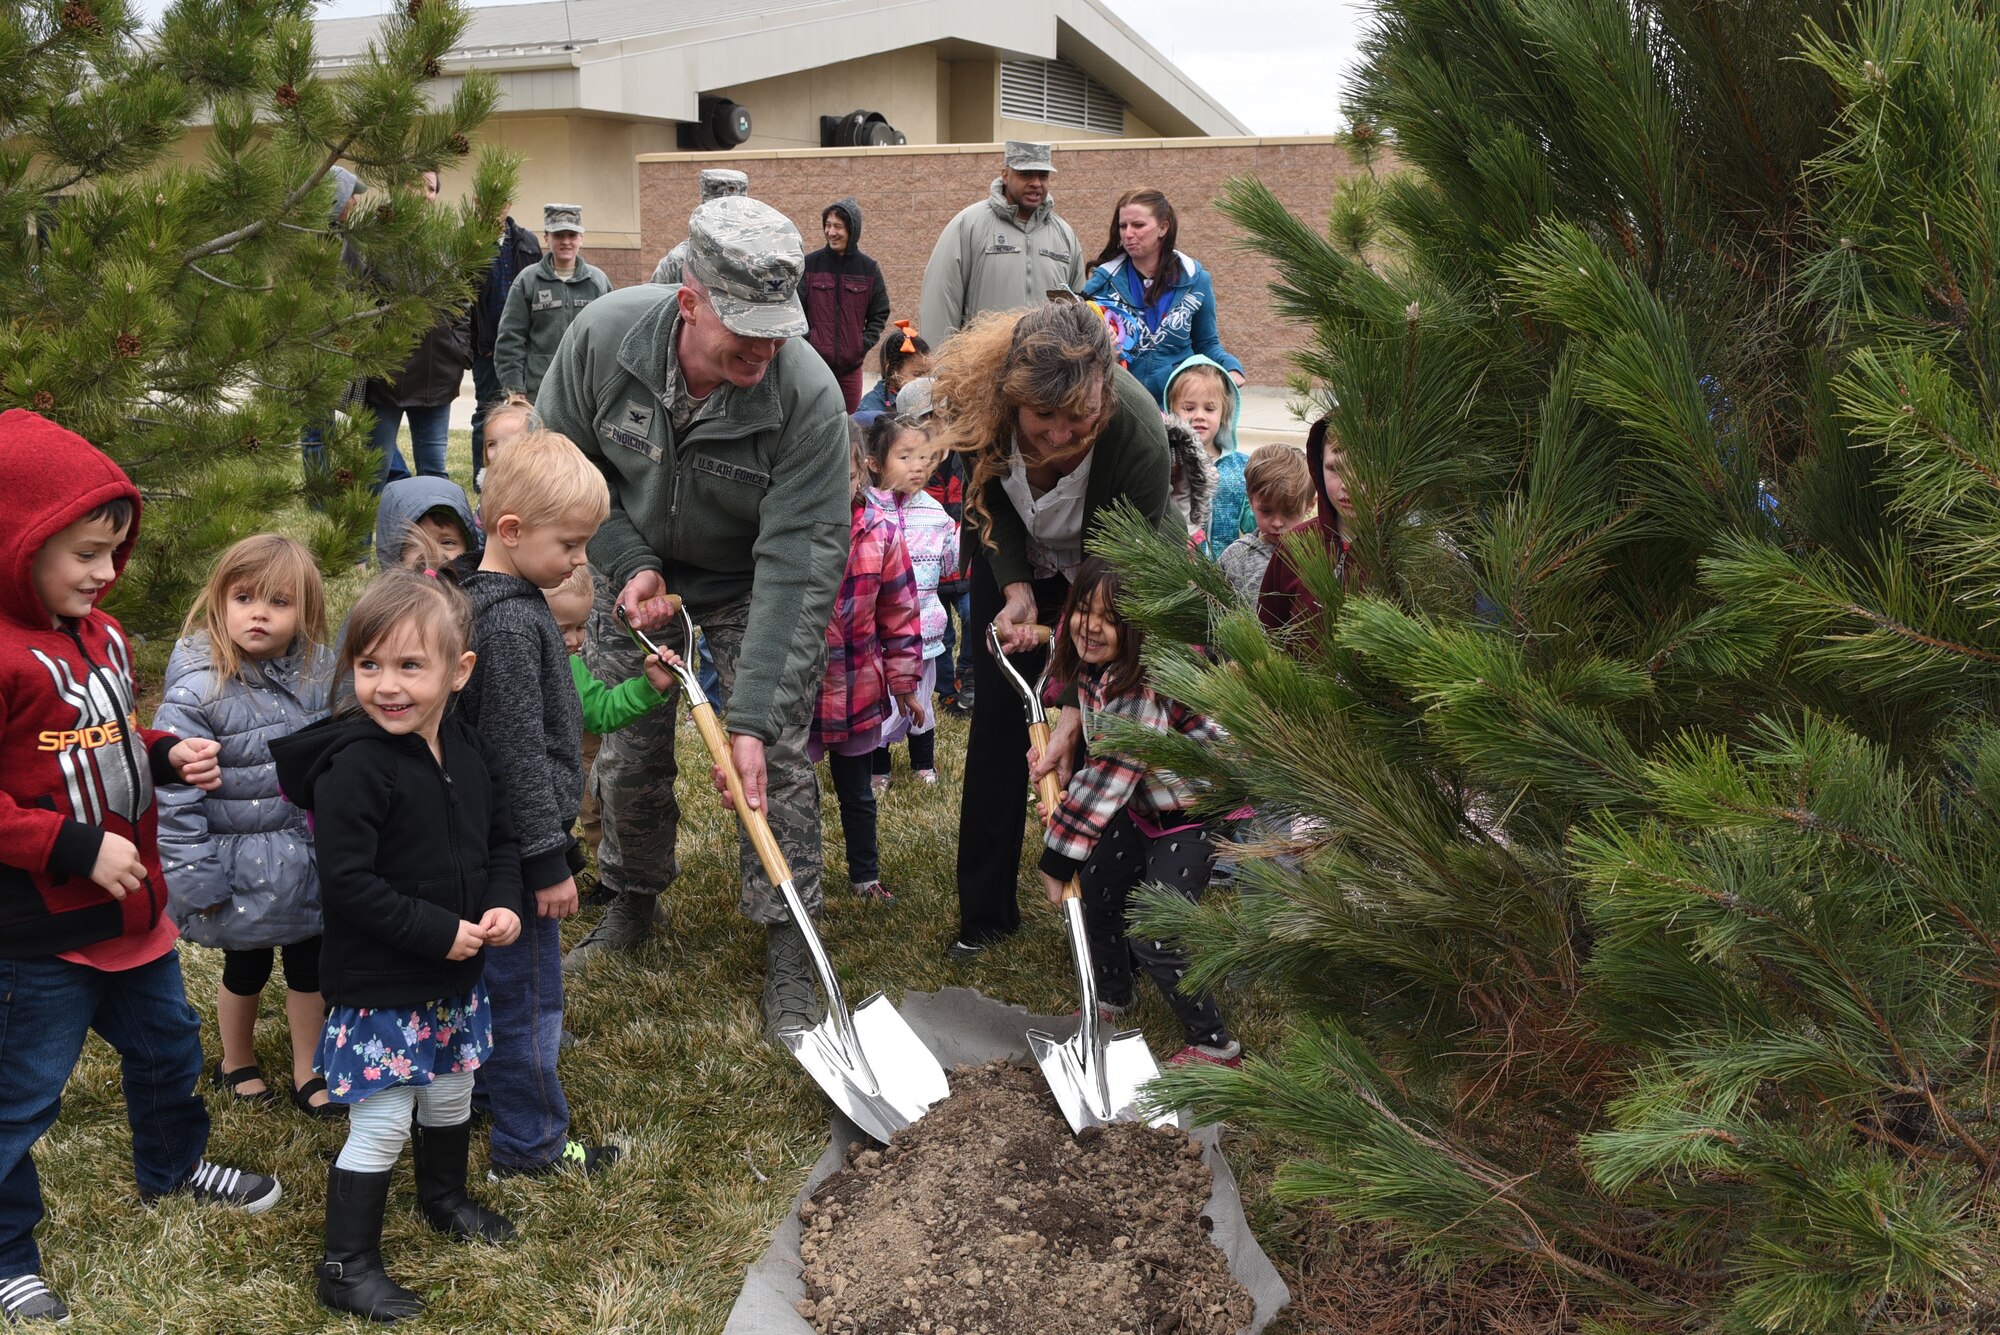 Col. Troy L. Endicott, 460th Space Wing commander, and Ms. Nancy Klasky, a member of the Community Forestry Division for Colorado State, ceremoniously pour dirt on a pine tree planted in honor of Arbor Day, April 26, 2018, on Buckley Air Force Base, Colorado. Children from the Child Development Center participated in the event by helping pour dirt around the base of the tree as well. (U.S. Air Force Photo by Senior Airman Jessica B. Kind)